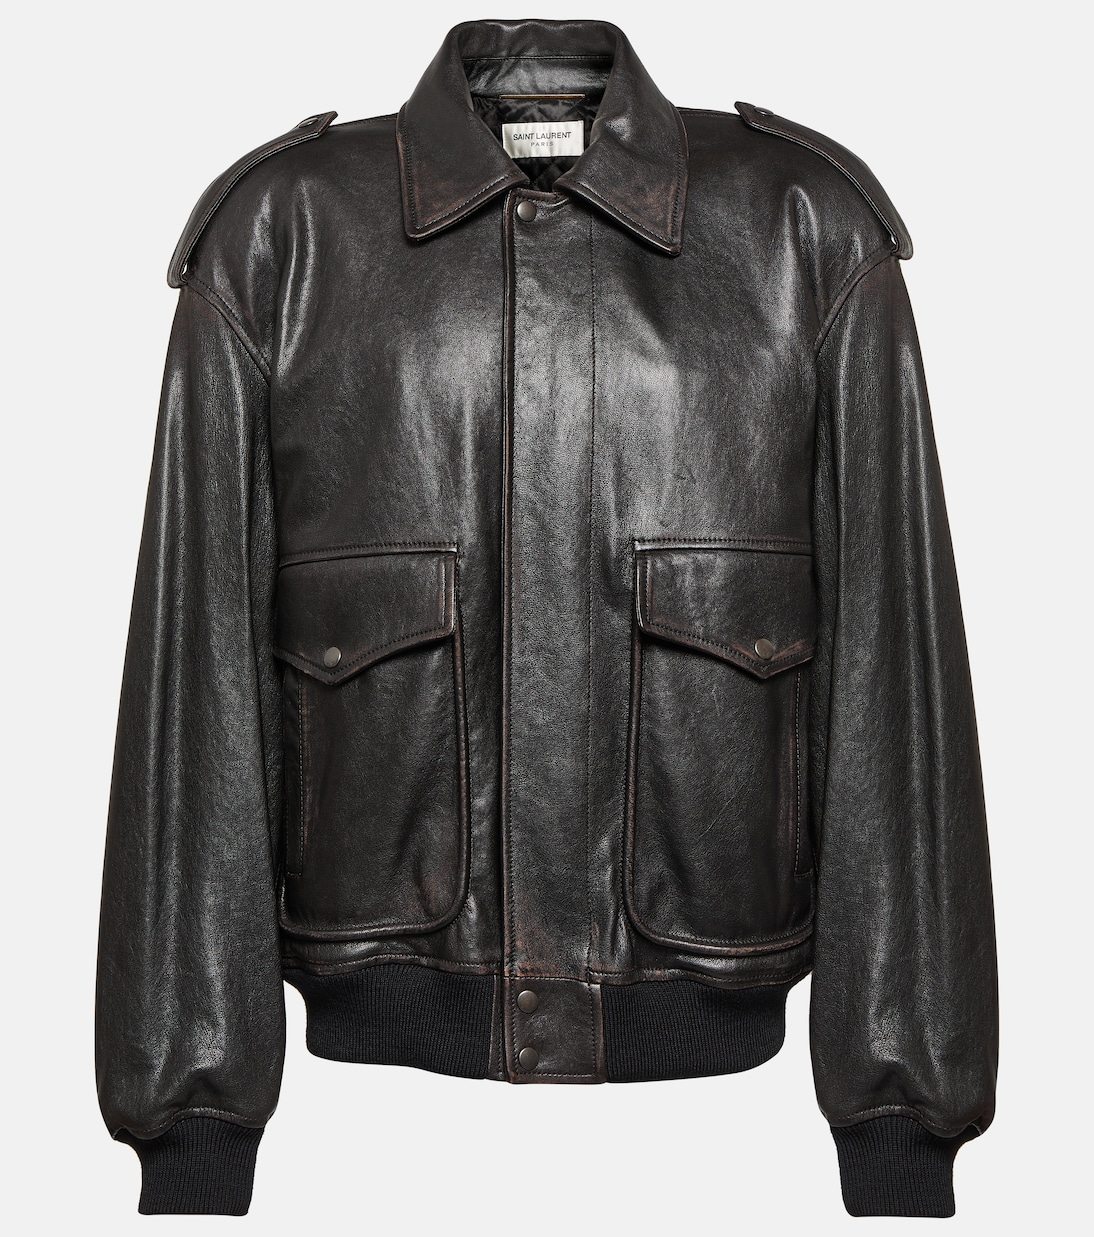 A black leather jacket with shoulder straps Description automatically generated